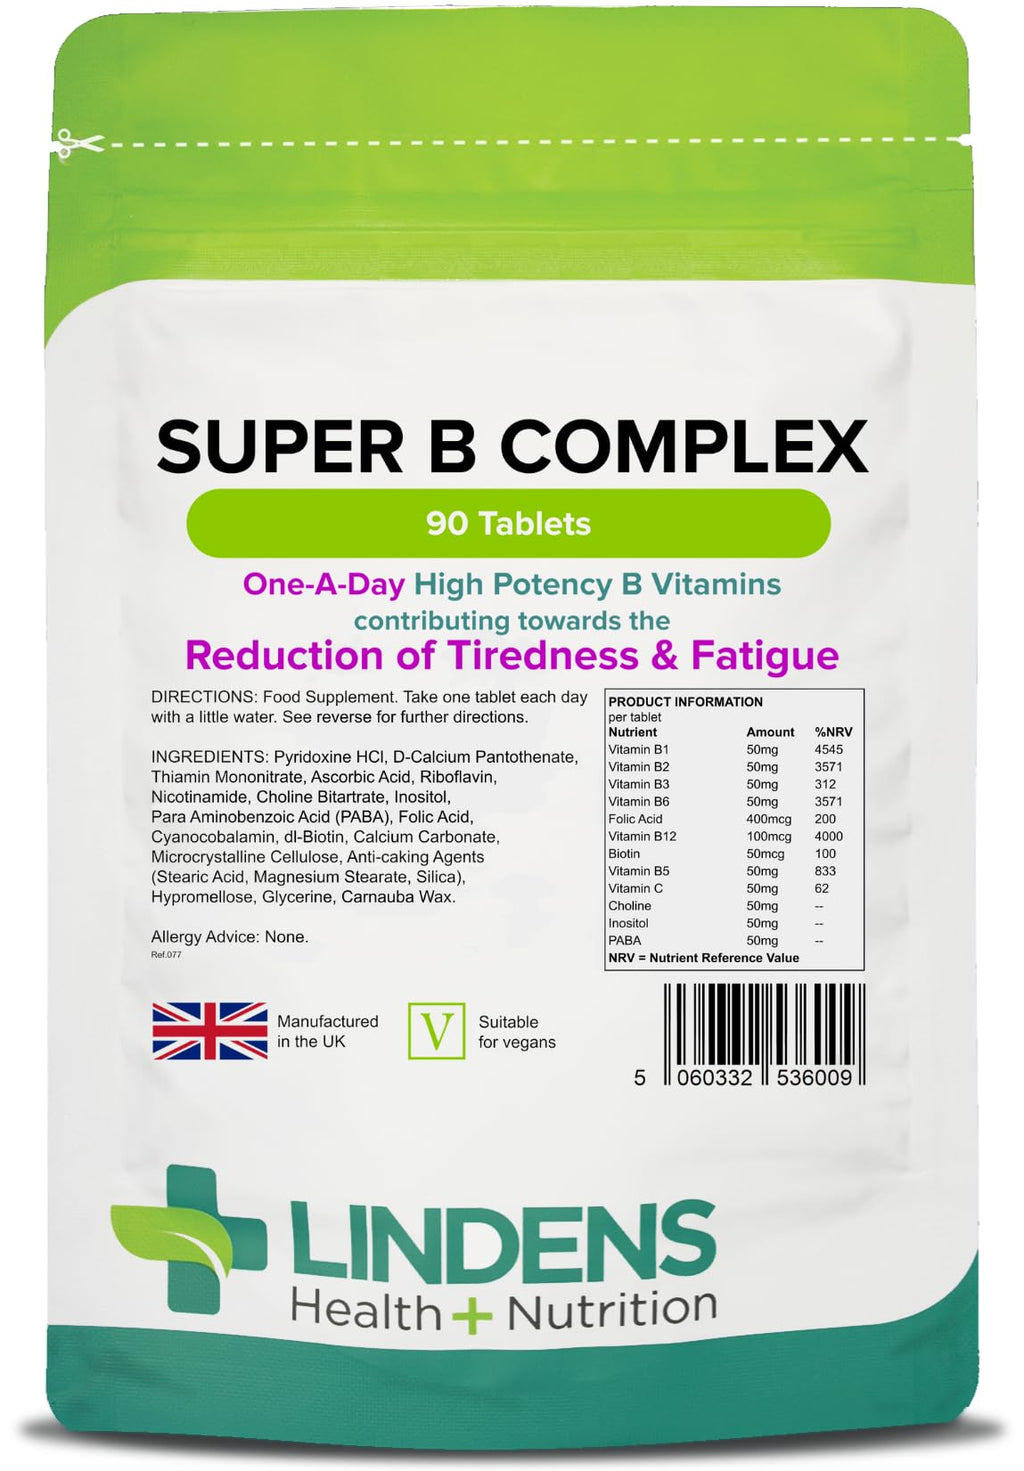 [Australia] - Lindens Super B Complex Vitamin Tablets - 90 Pack - with a Full Spectrum of B Vitamins and Vitamin C - Reduces Tiredness and Fatigue - UK Manufacturer, Letterbox Friendly 